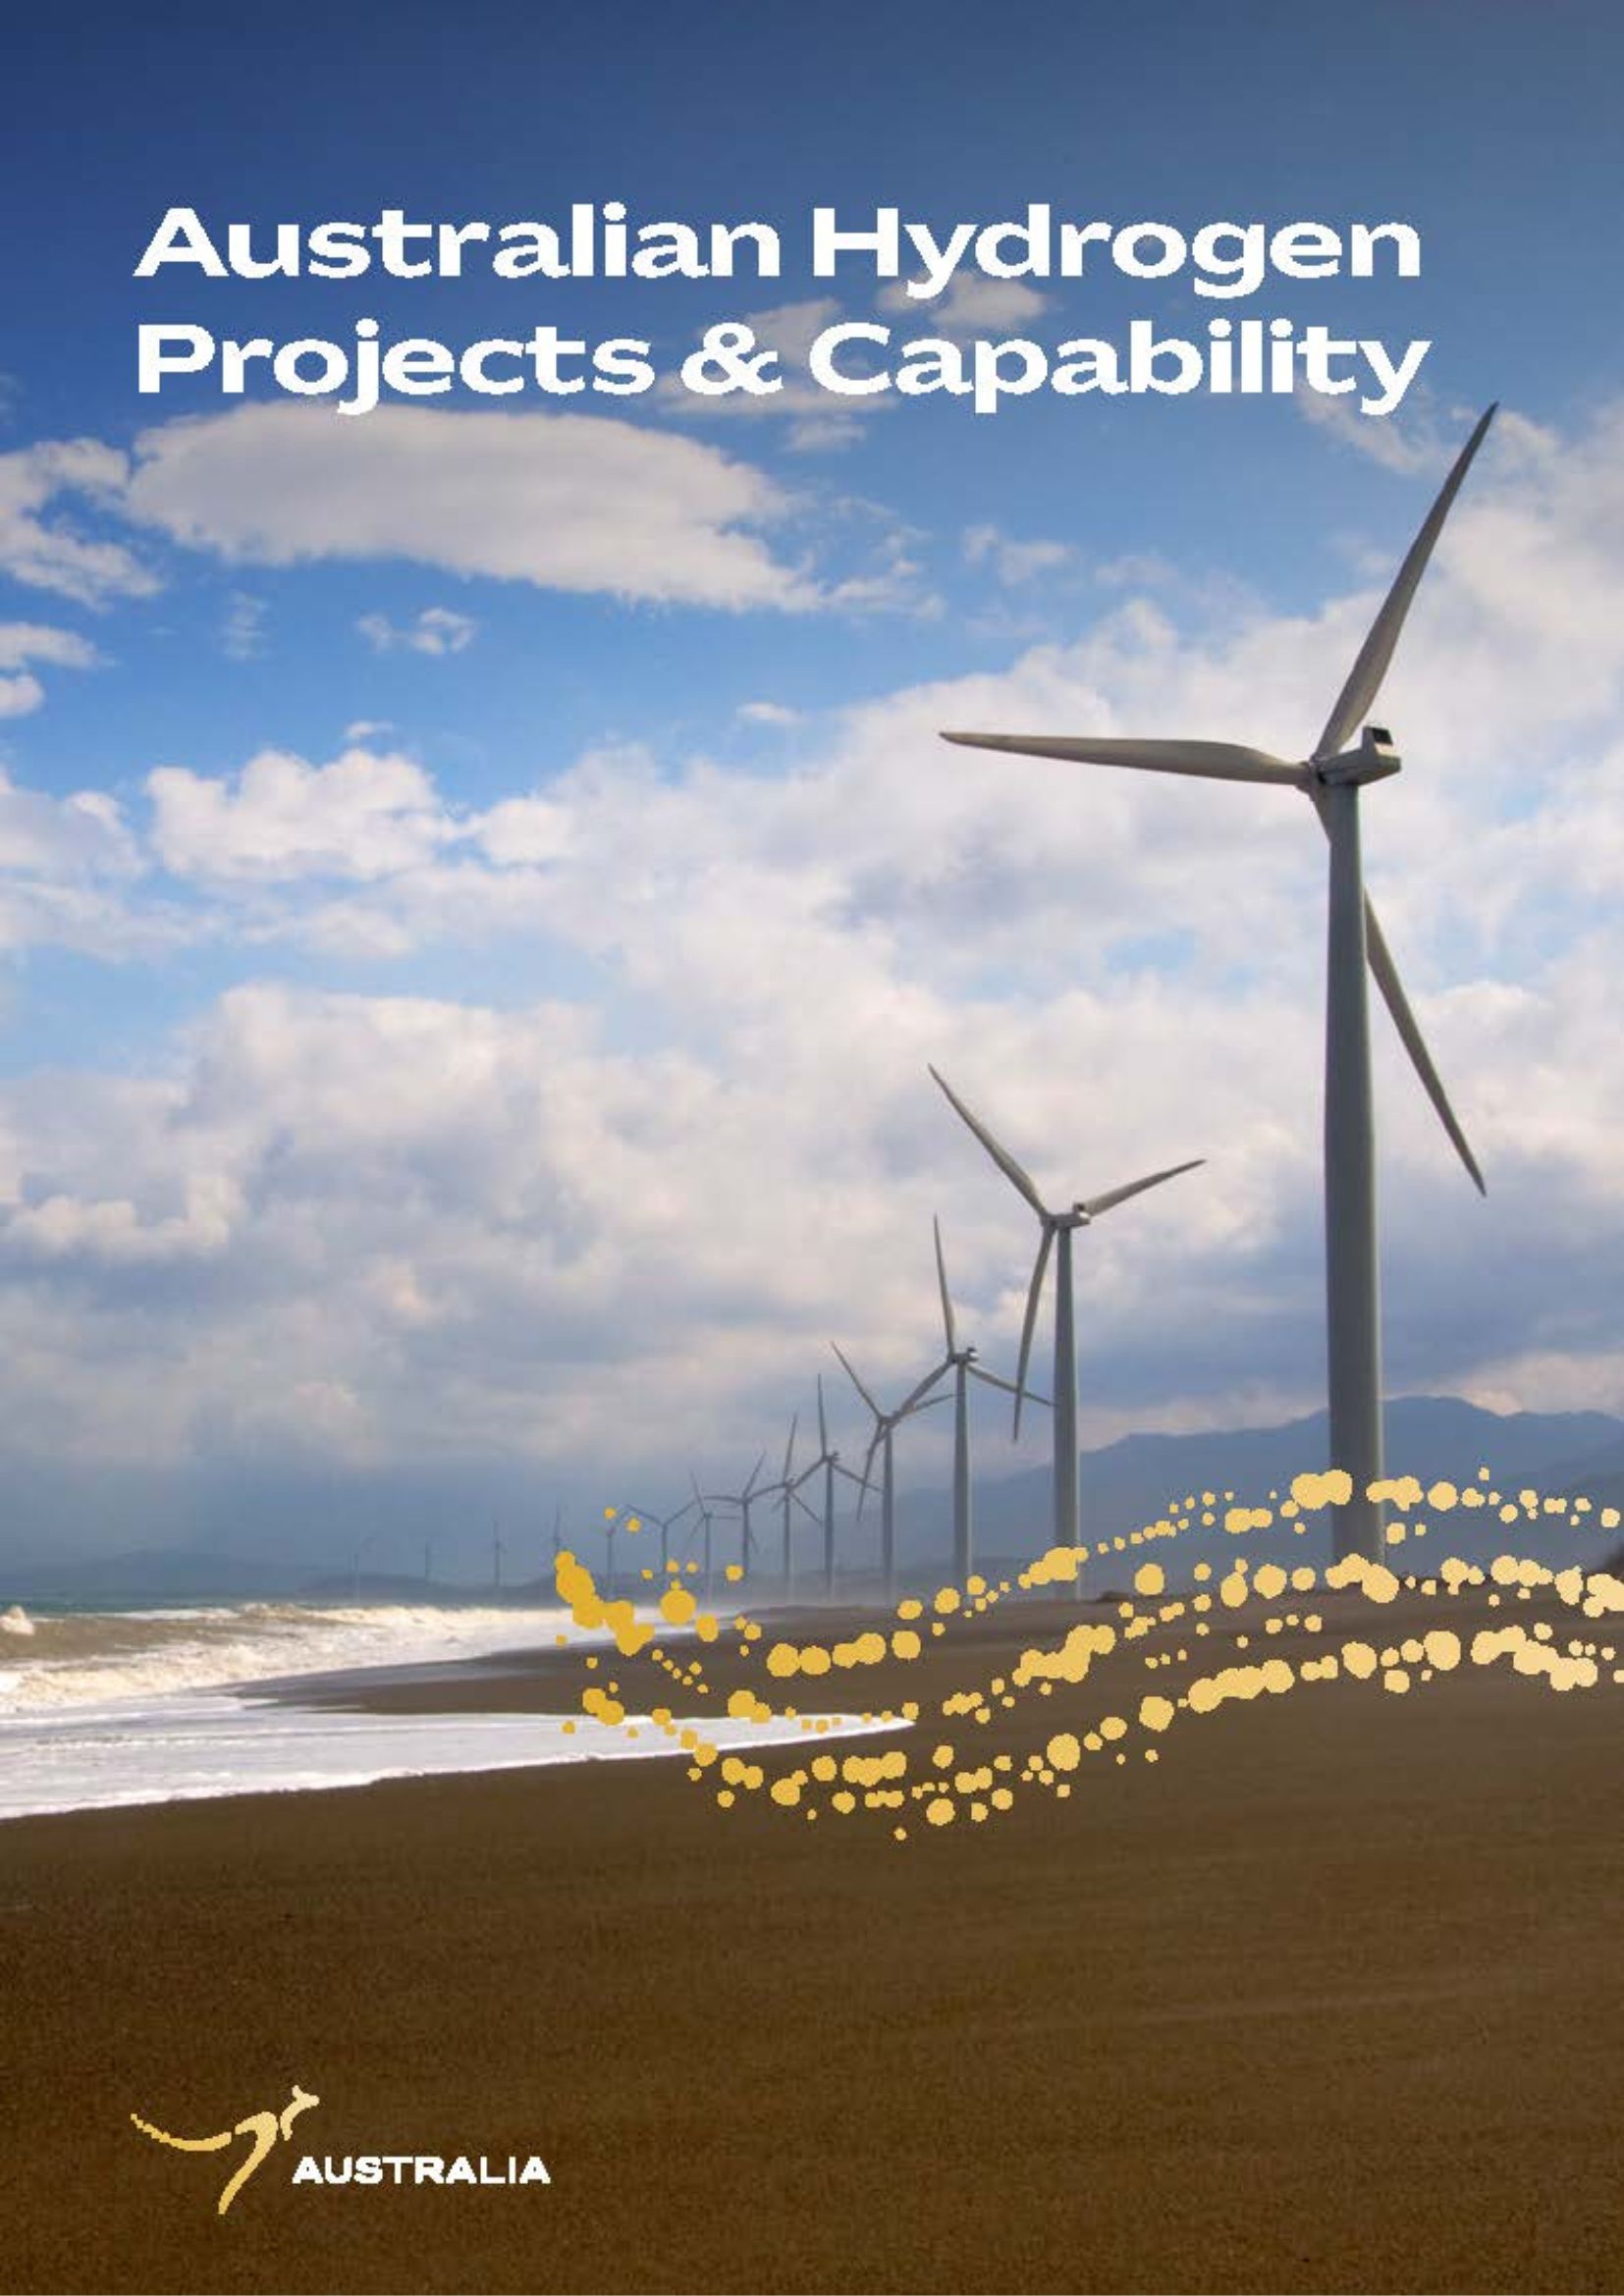 Australia hydrogen projects and capability report cover depicting a wind farm with a cloudy blue sky in the background